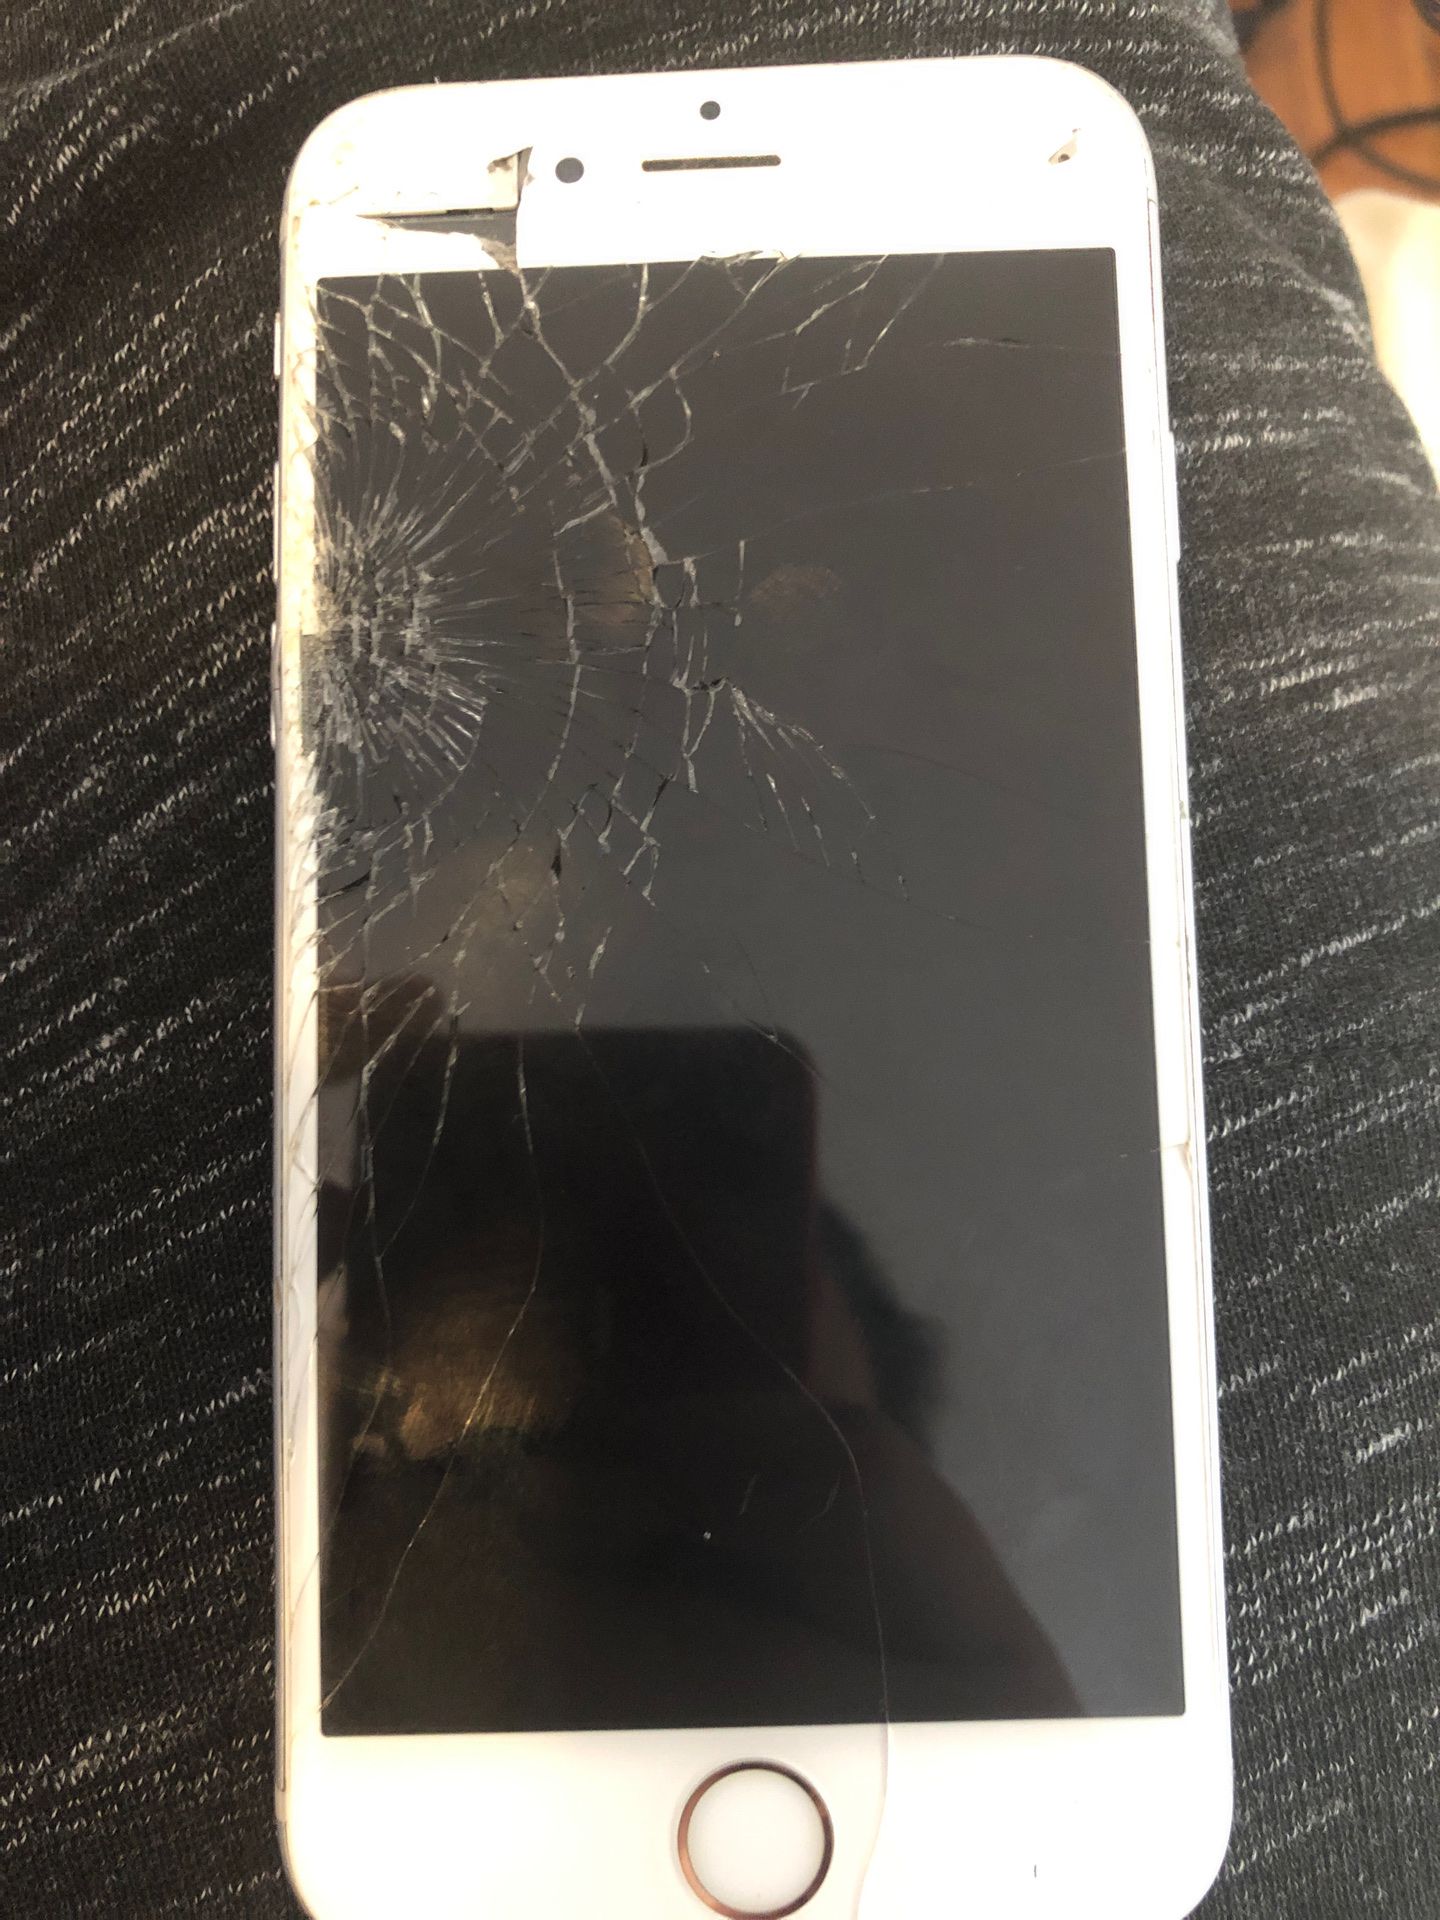 iPhone 6 selling for parts